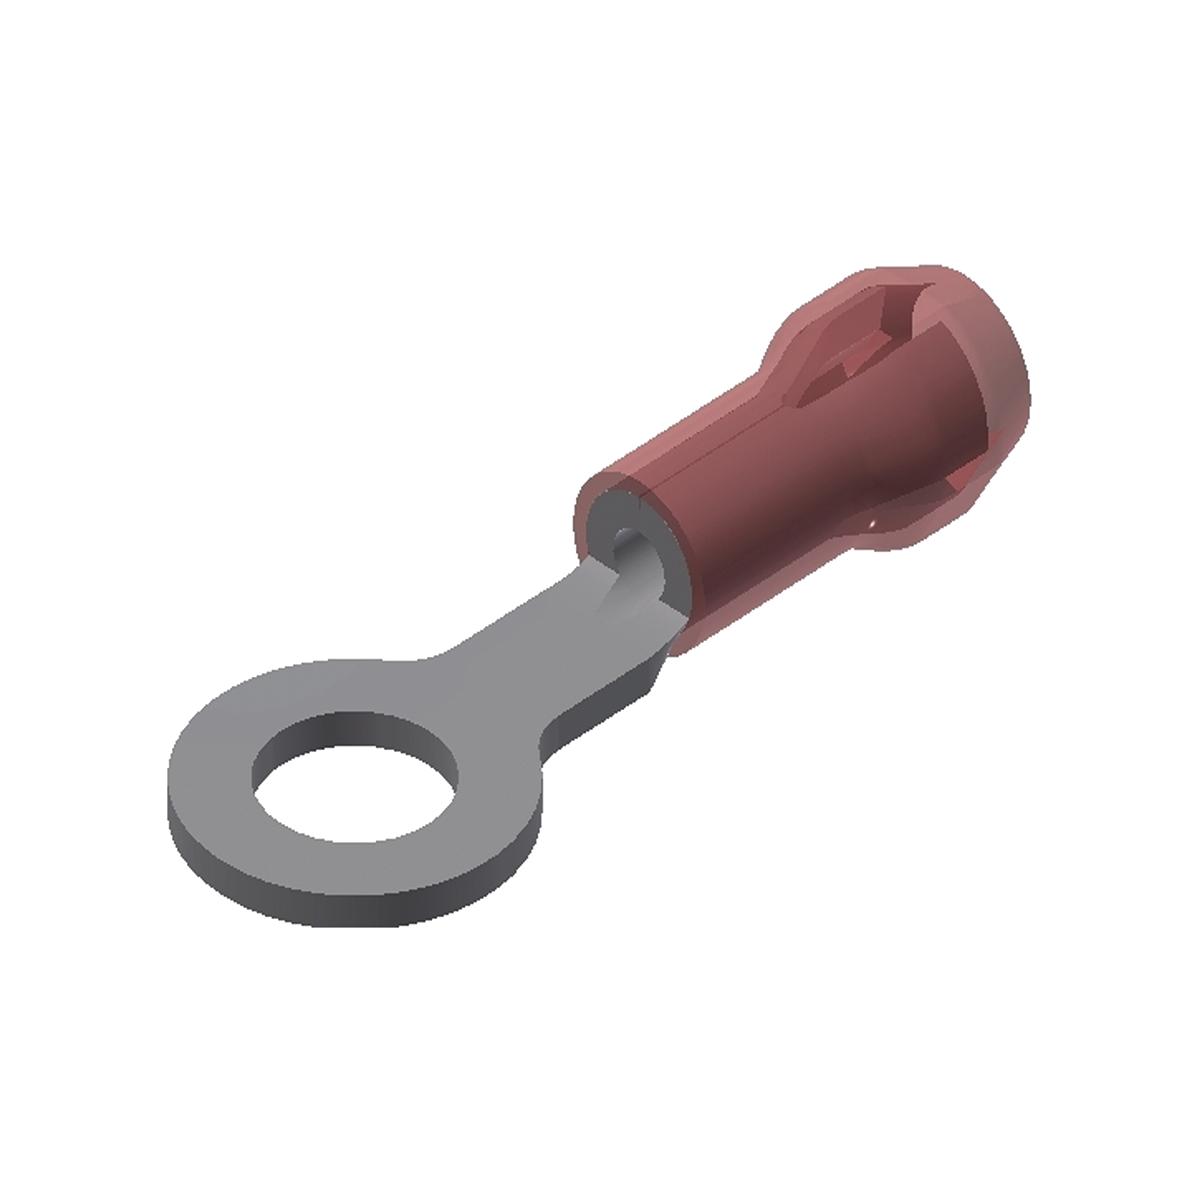 Hubbell YAE18N21 Nylon Ring Terminal For 22 - 18 AWG.  ; Features: INSULUG Type YAE-N Nylon Insulated Terminals Are Designed With A Multi finger Insulation Grip For Paper, EPR And Other Elastic Or Hard To Grip Insulations, The Metal Fingers Firmly Grip The Insulation Prov